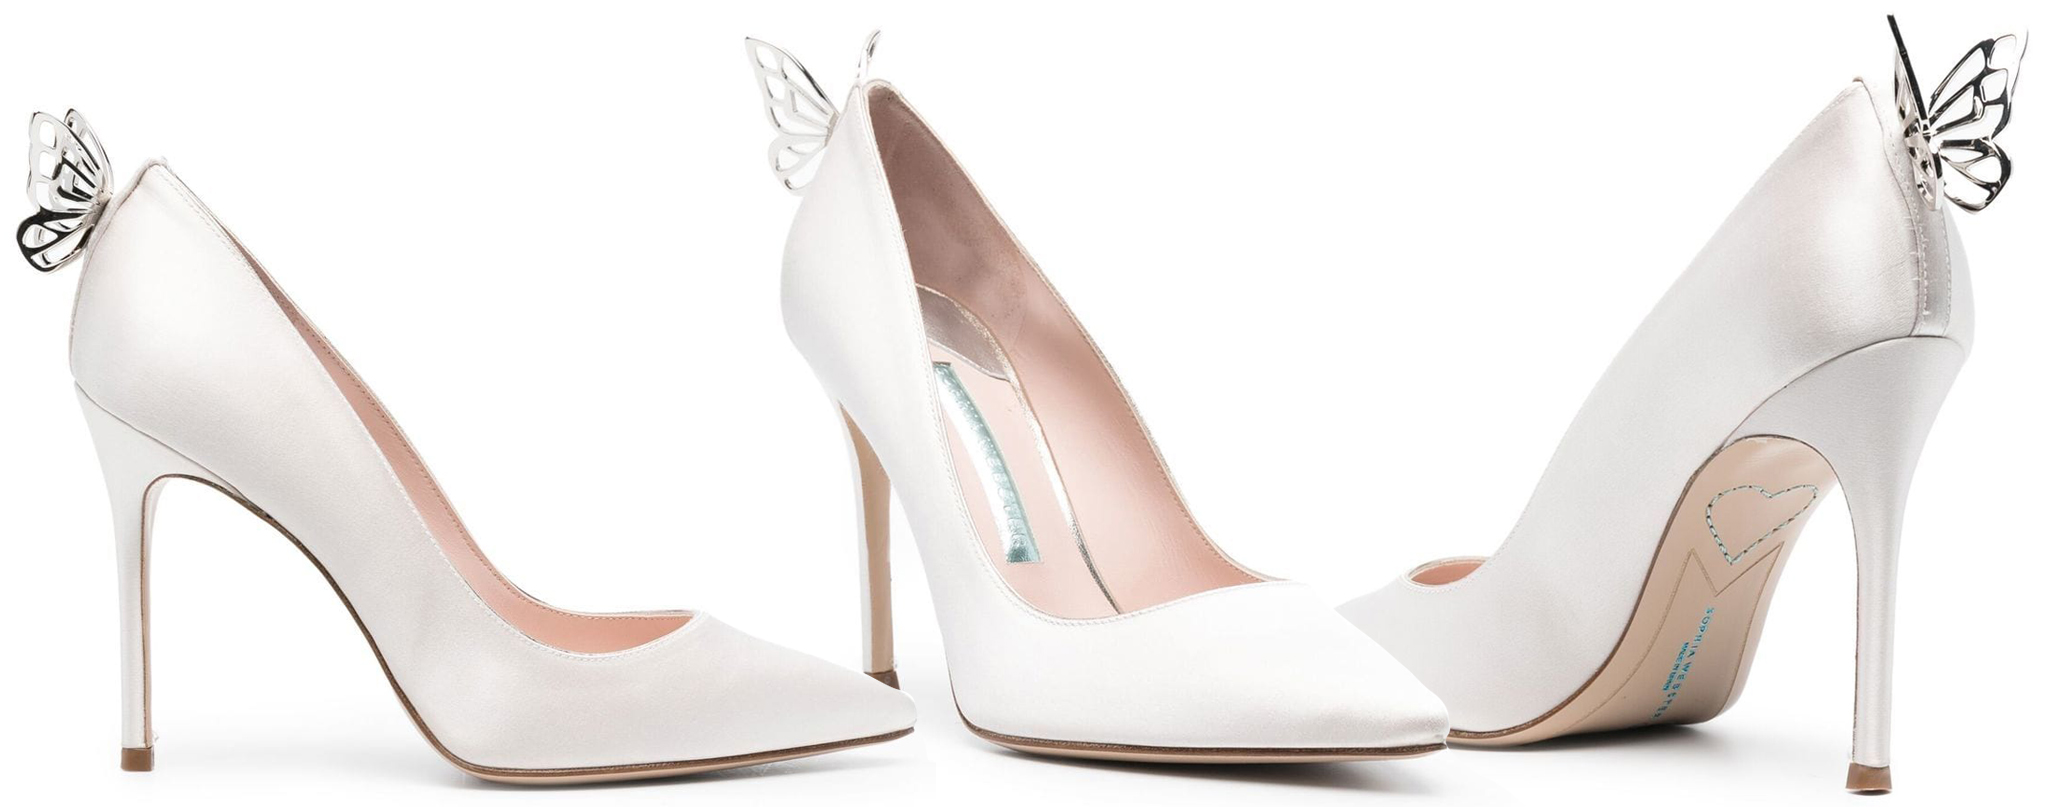 Sophia Webster's Mariposa pumps are feminine and refined in ivory satin with a romantically placed small butterfly at the heel